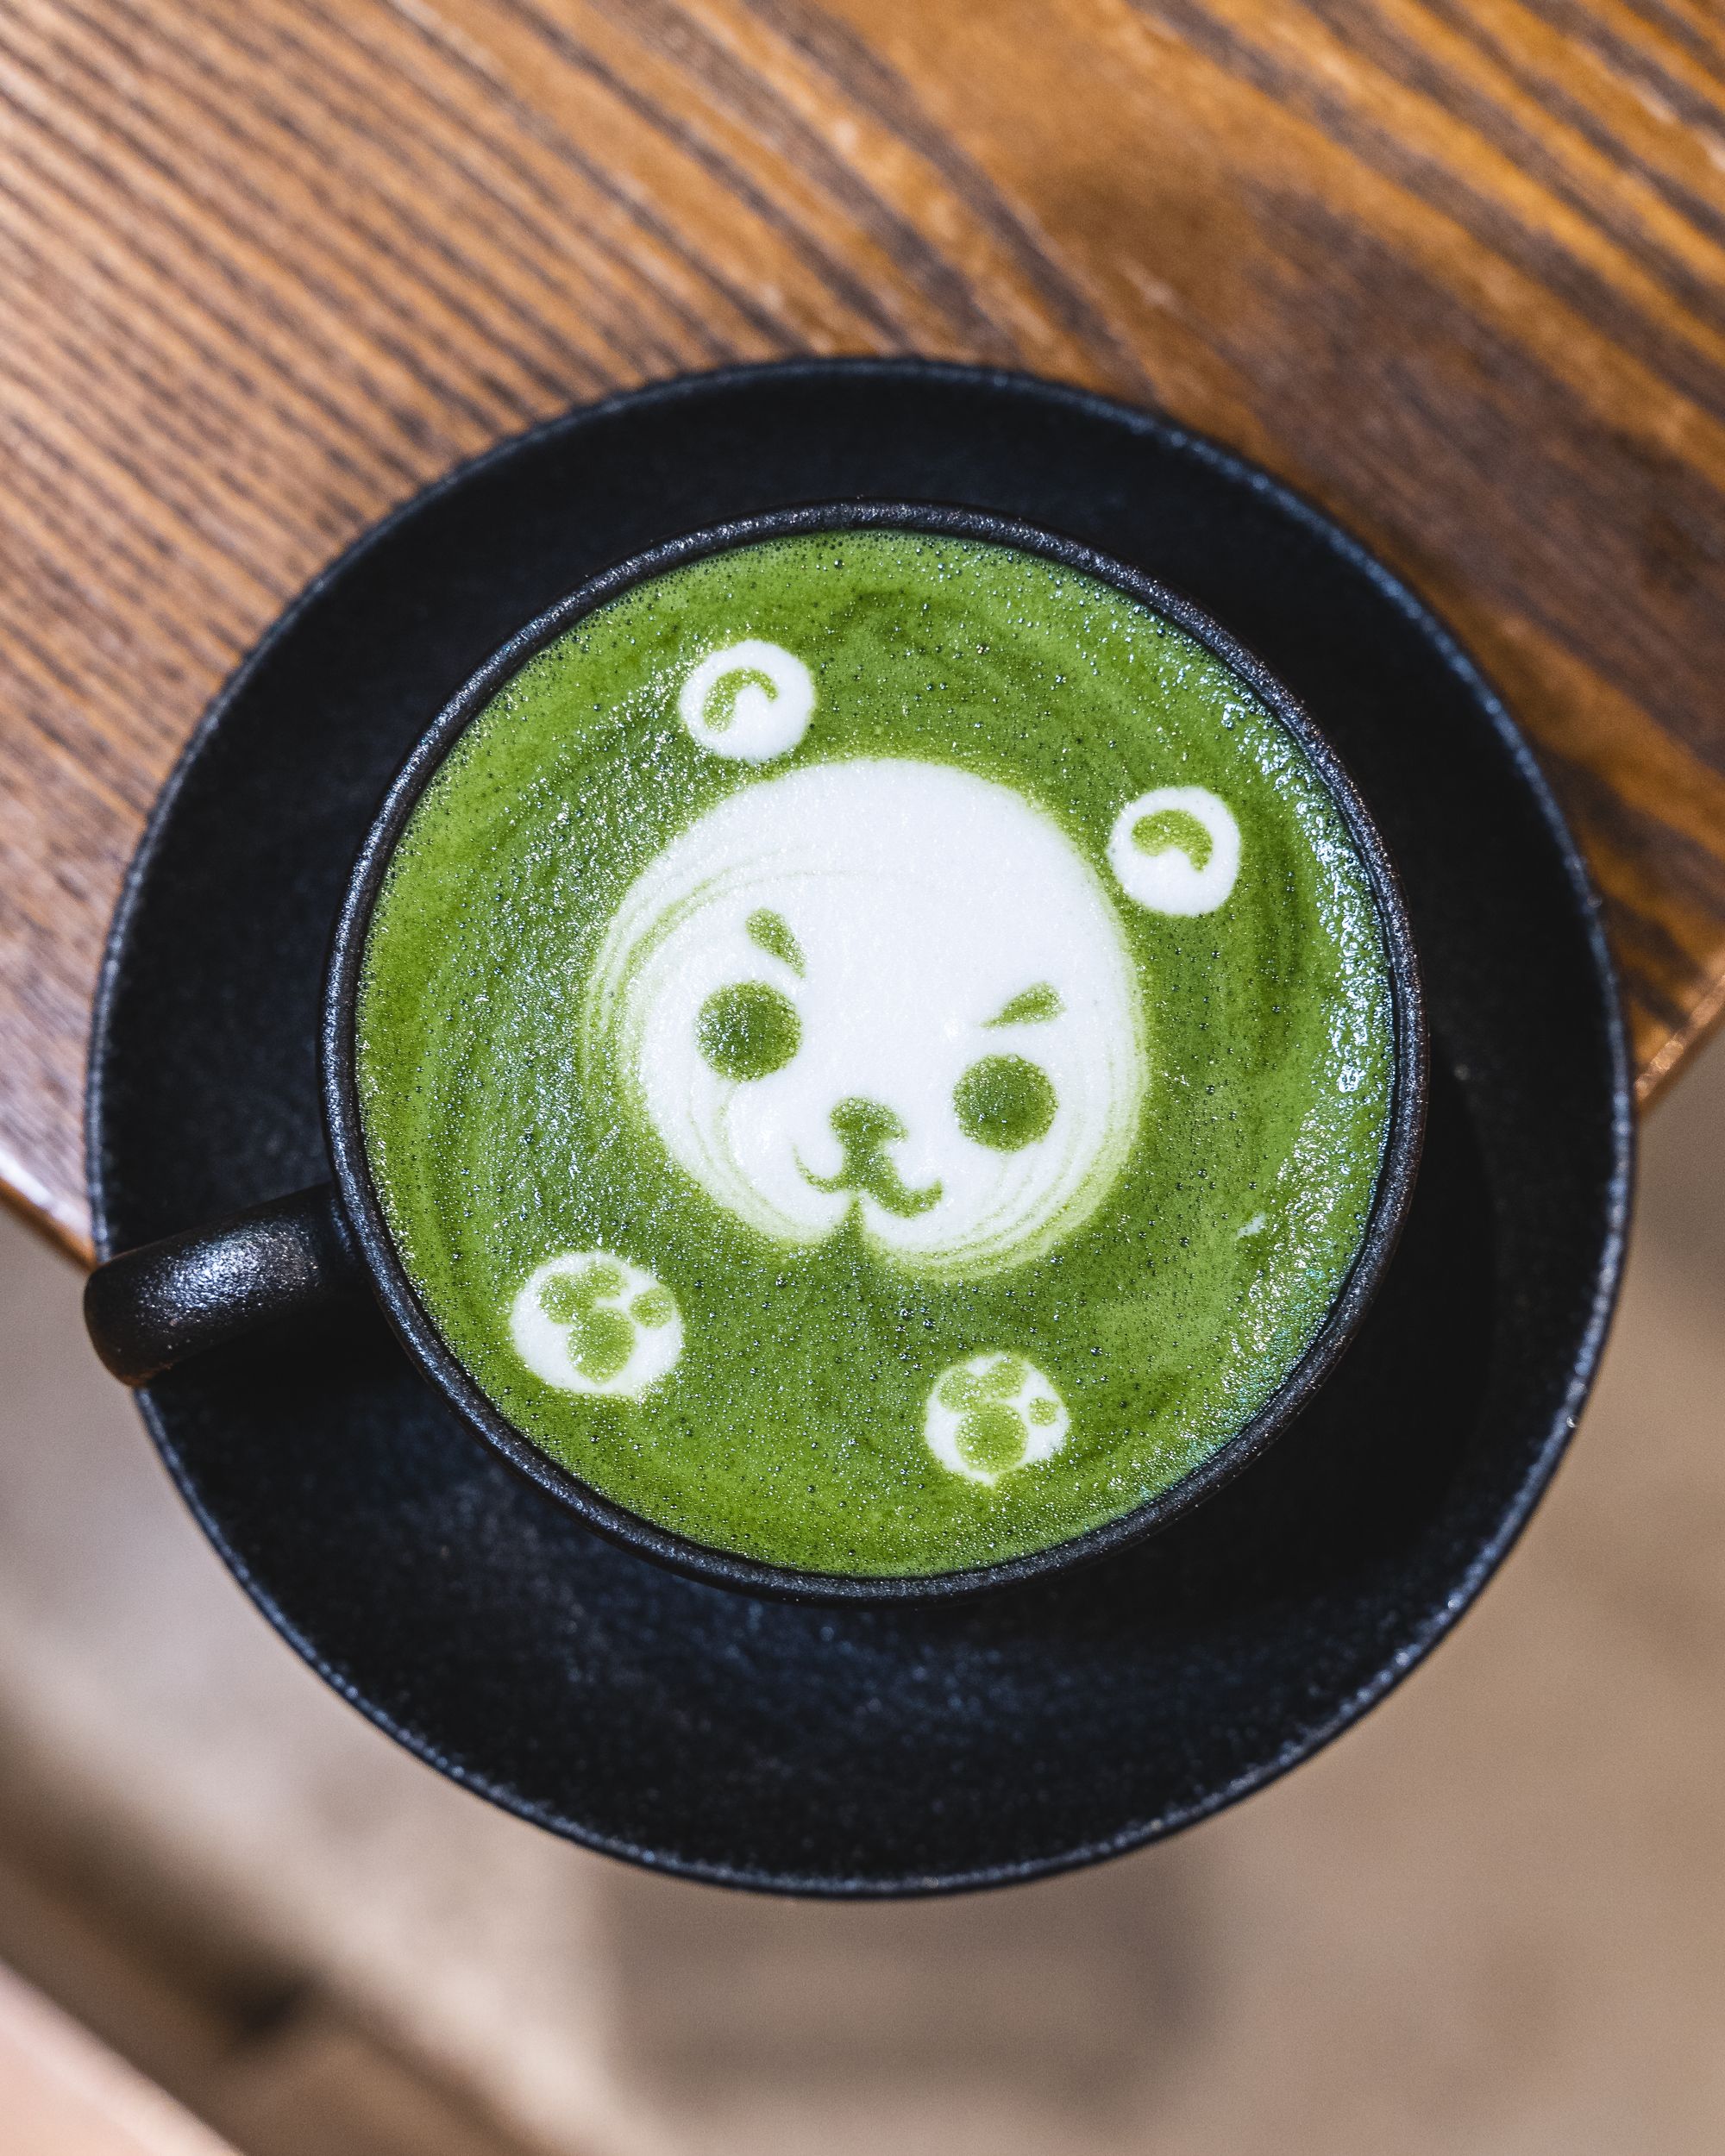 Matcha latte with cute teddy bear latte art, in a black mug and on a black plate